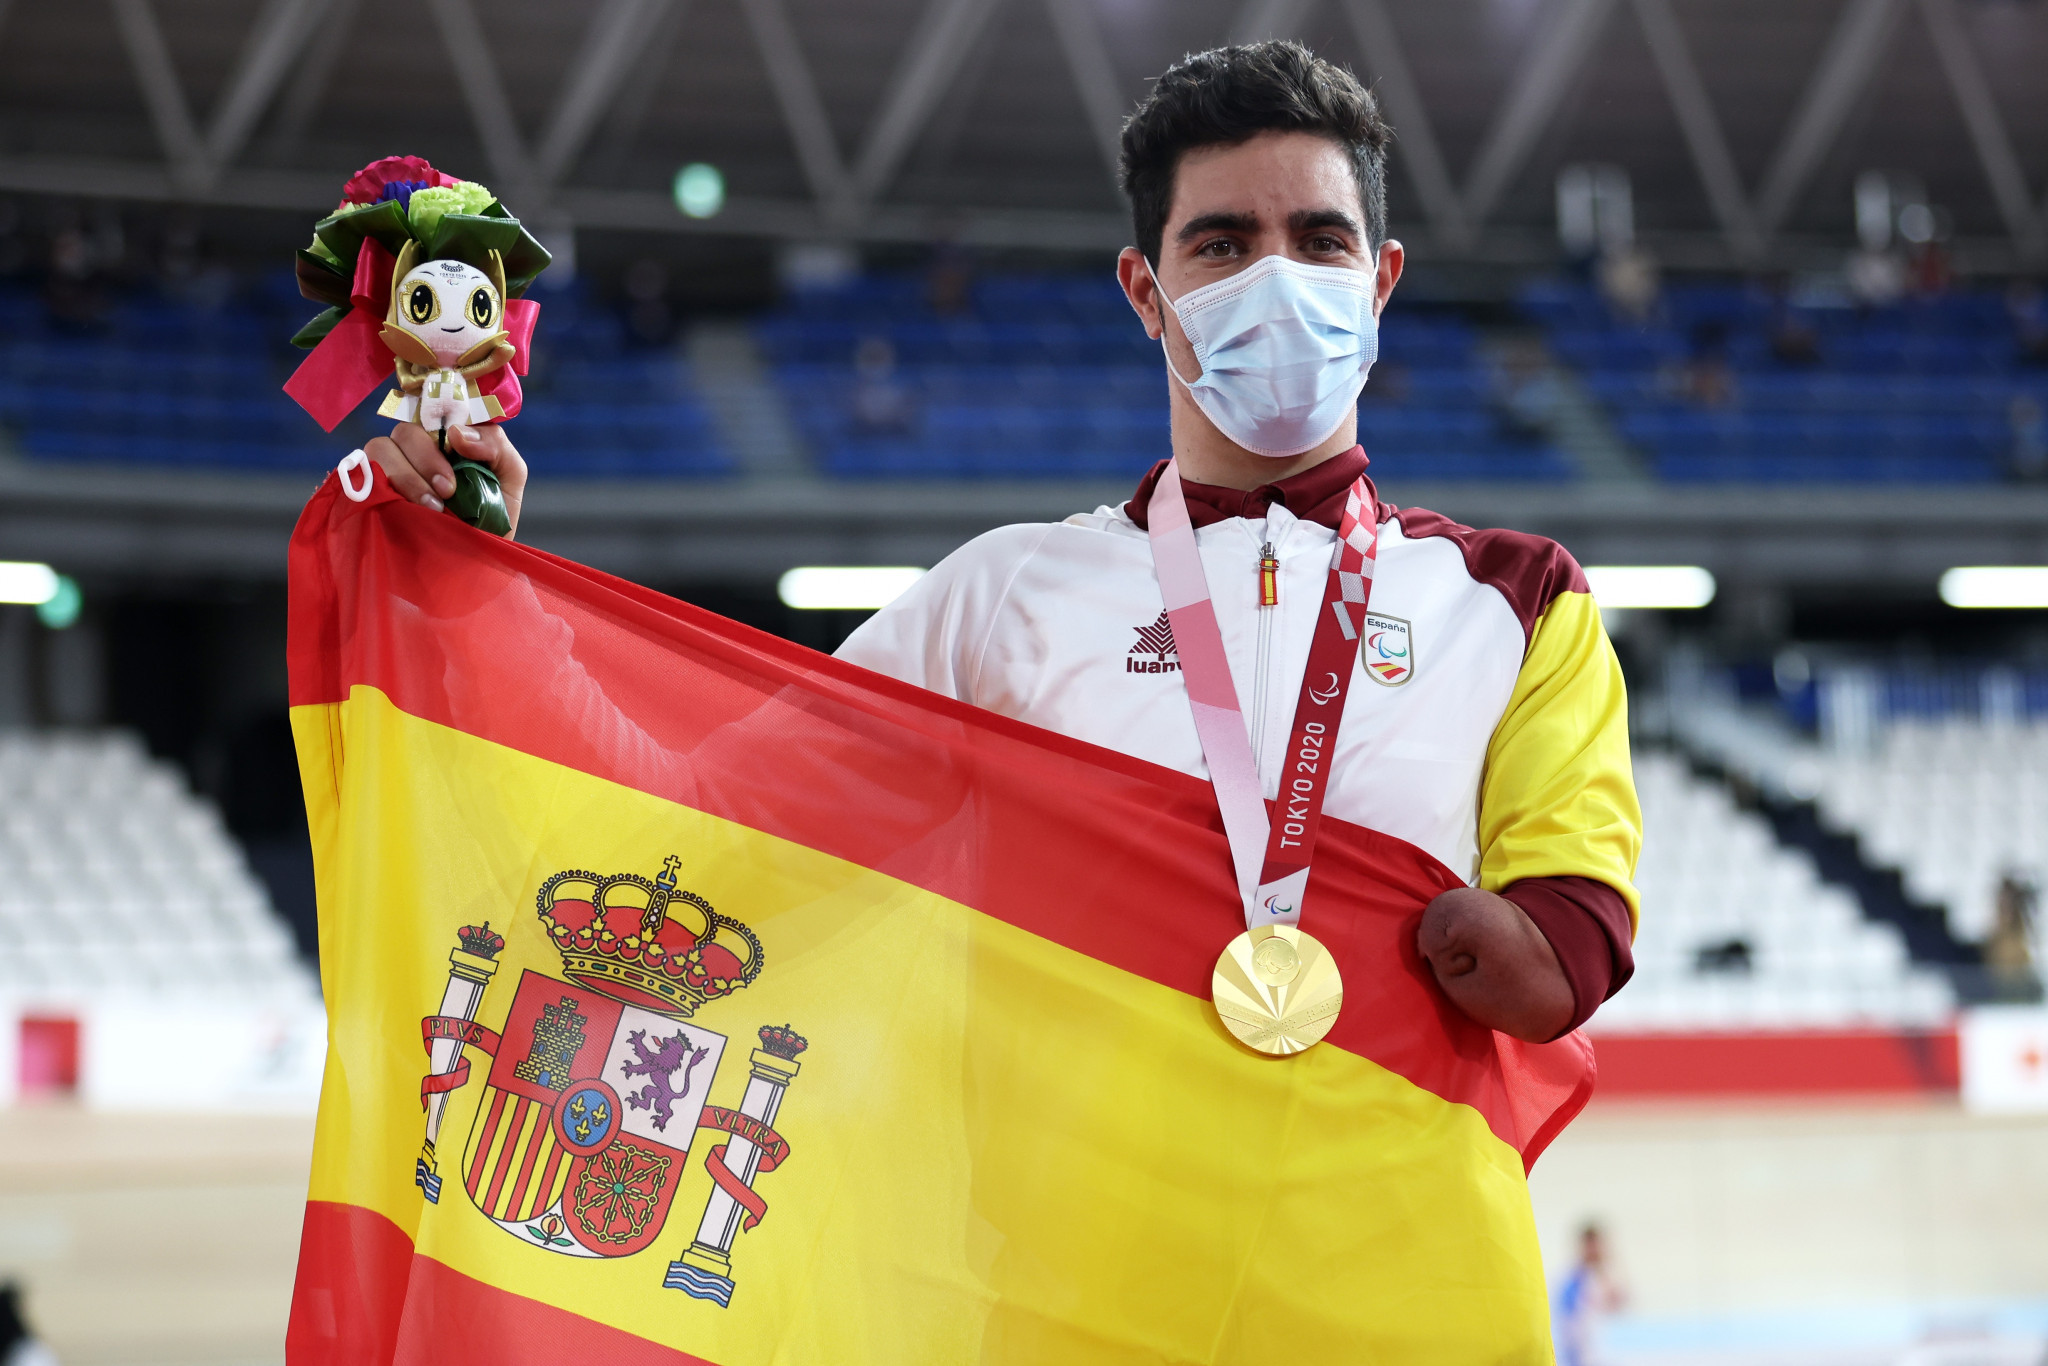  Alfonso Cabello Llamas celebrates after winning the men's C4-5 1000m time trial  ©Getty Images